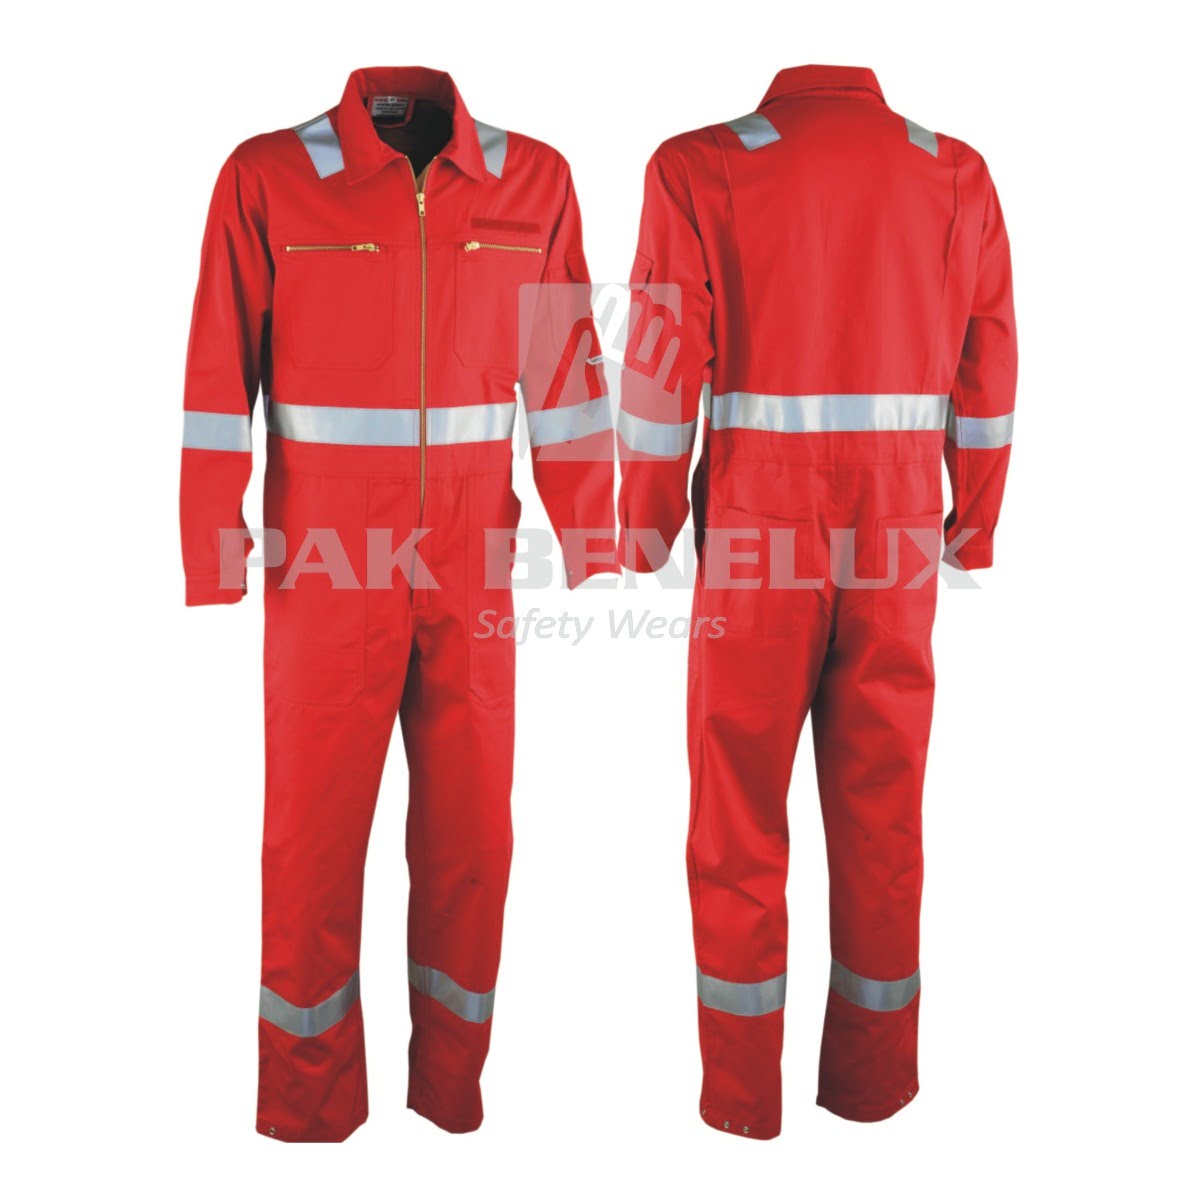 Coverall Pak Benelux BSCI OEM Gloves Manufacturer in Sialkot Pakistan